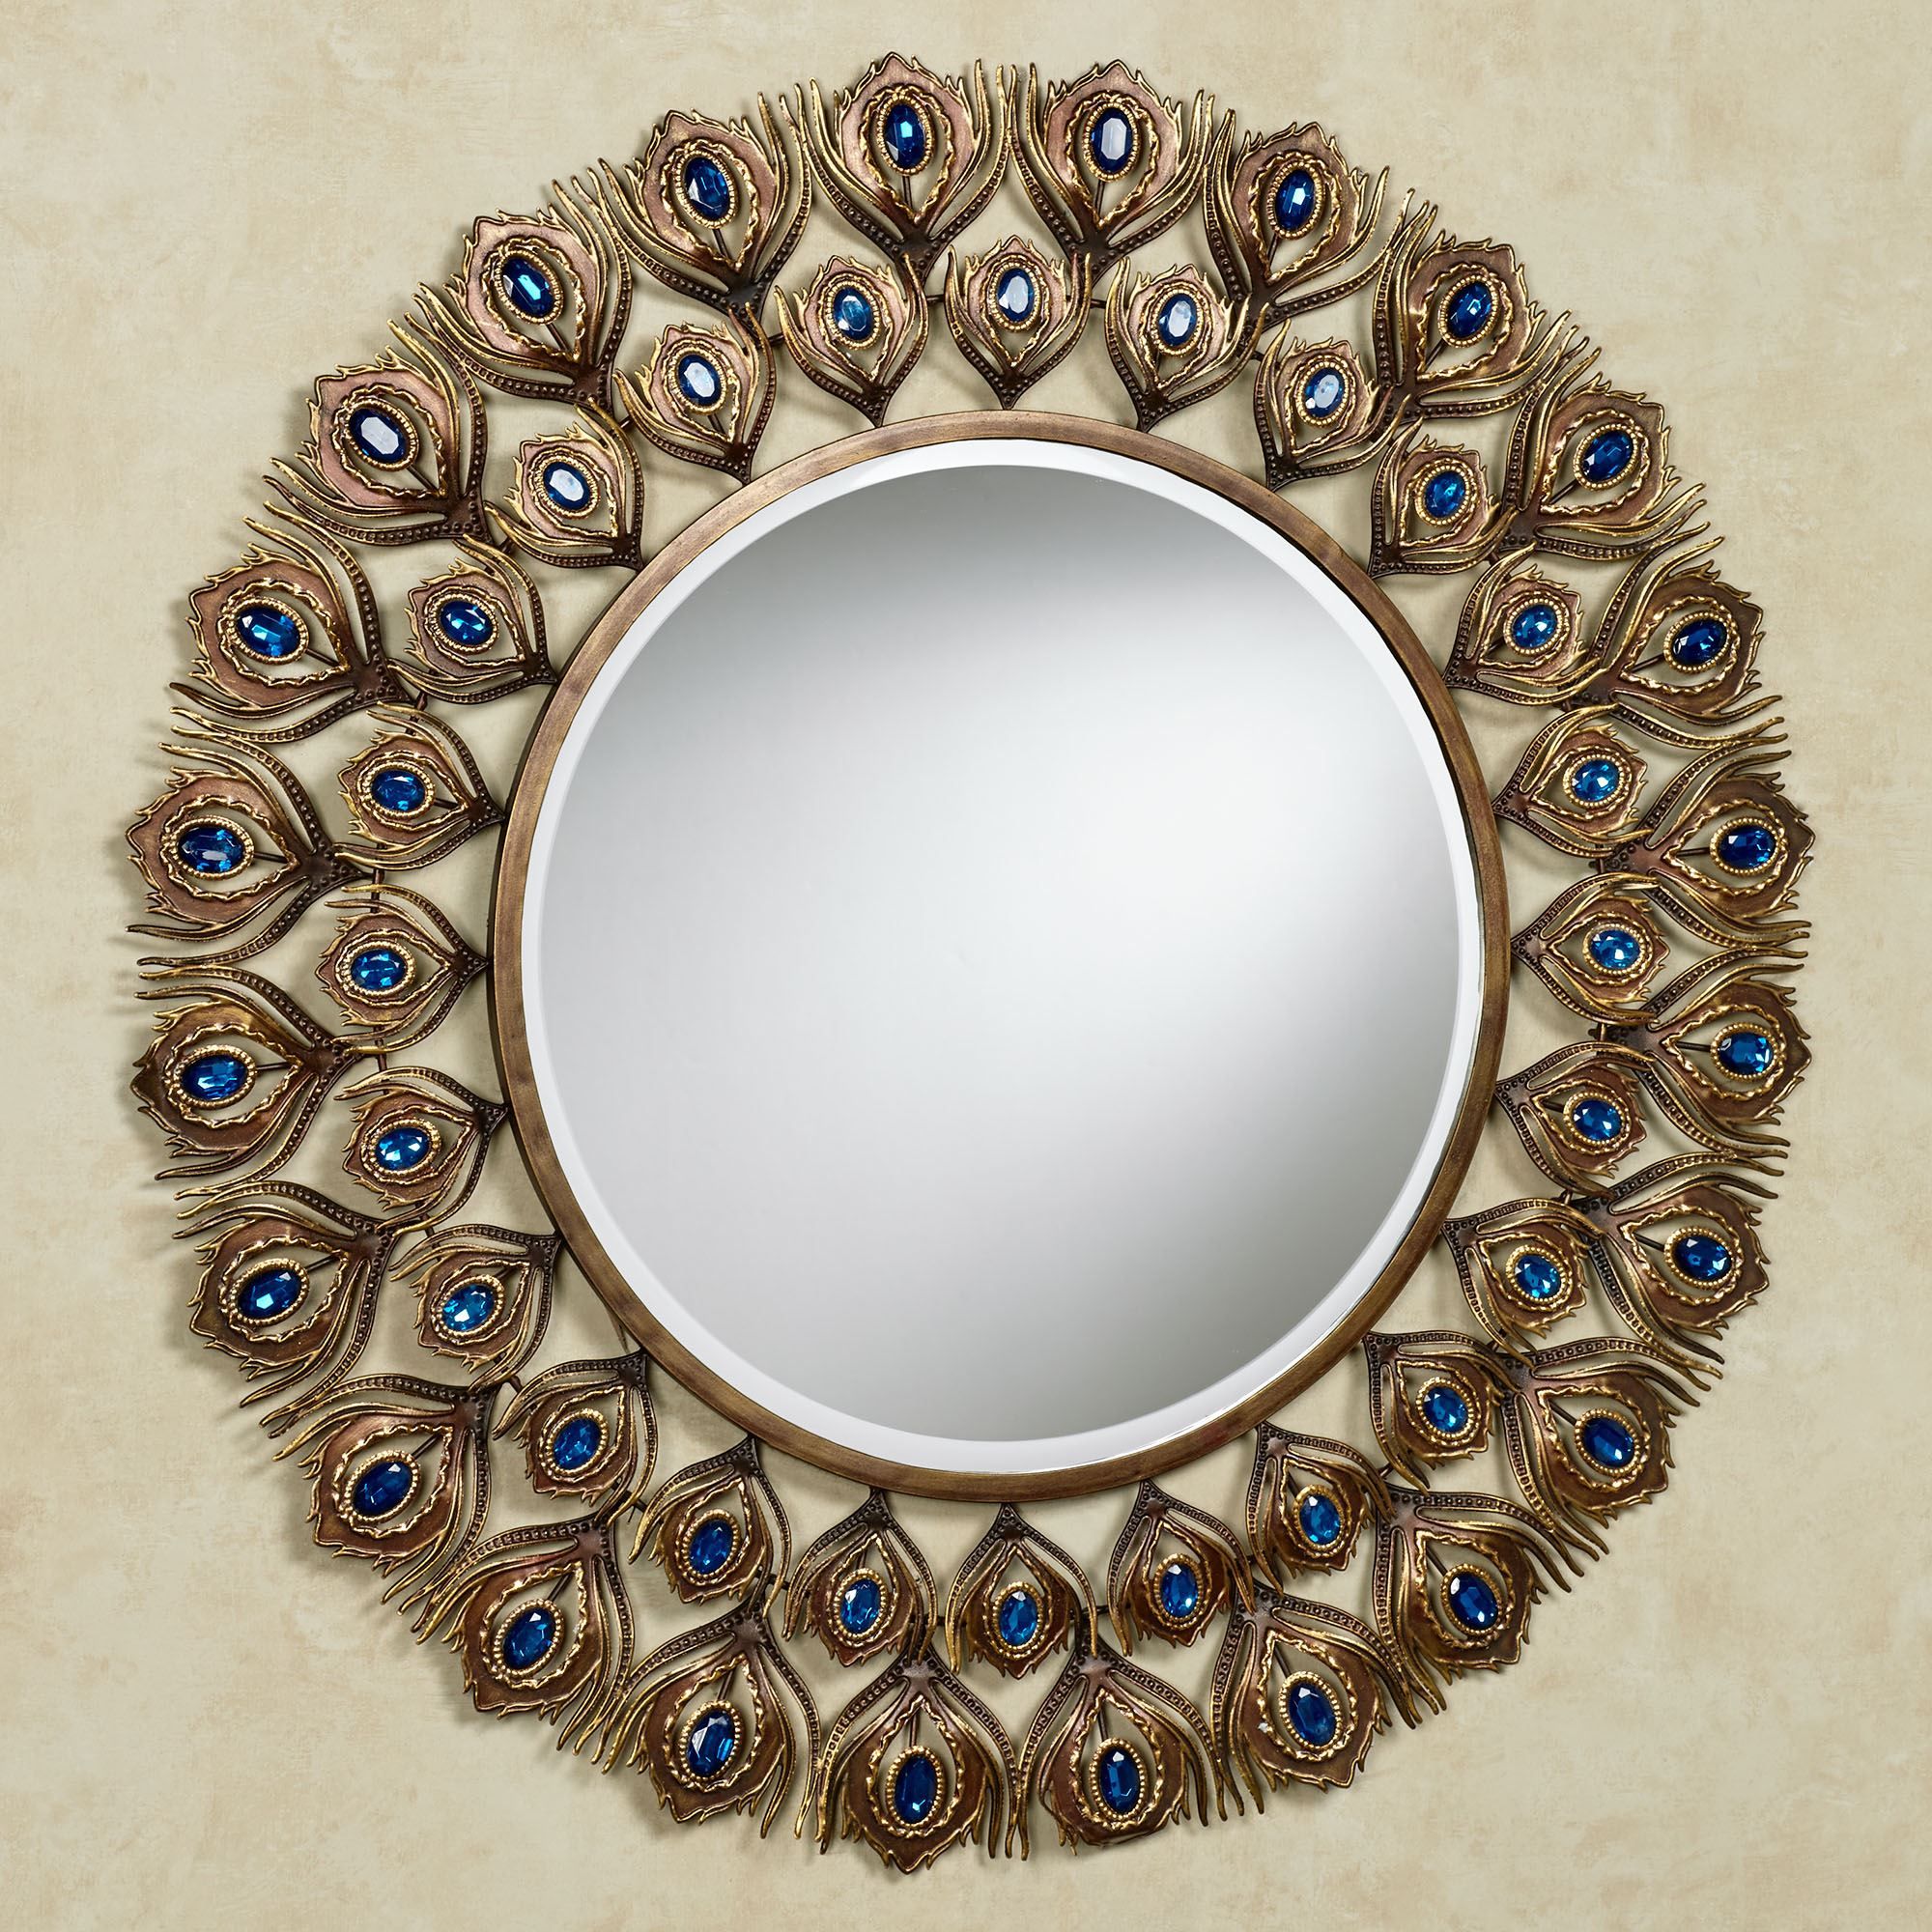 Royal Peacock Jeweled Round Wall Mirror Throughout Scalloped Round Wall Mirrors (View 6 of 15)